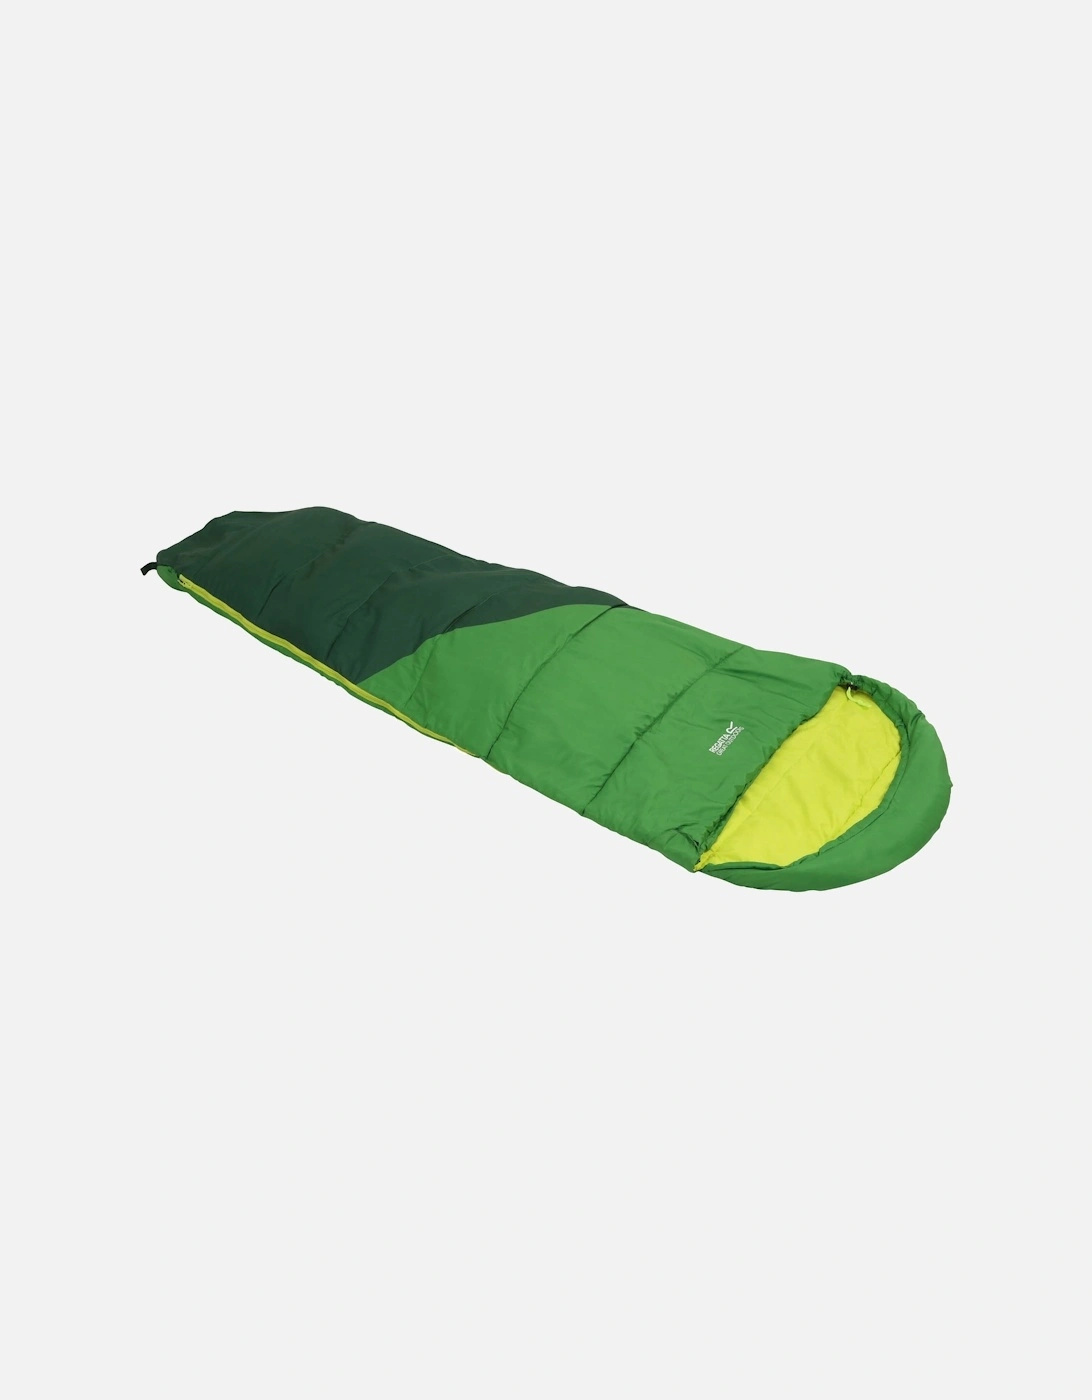 Hilo V2 250 Mummy Camping Insulated Sleeping Bag - Extreme Green, 6 of 5